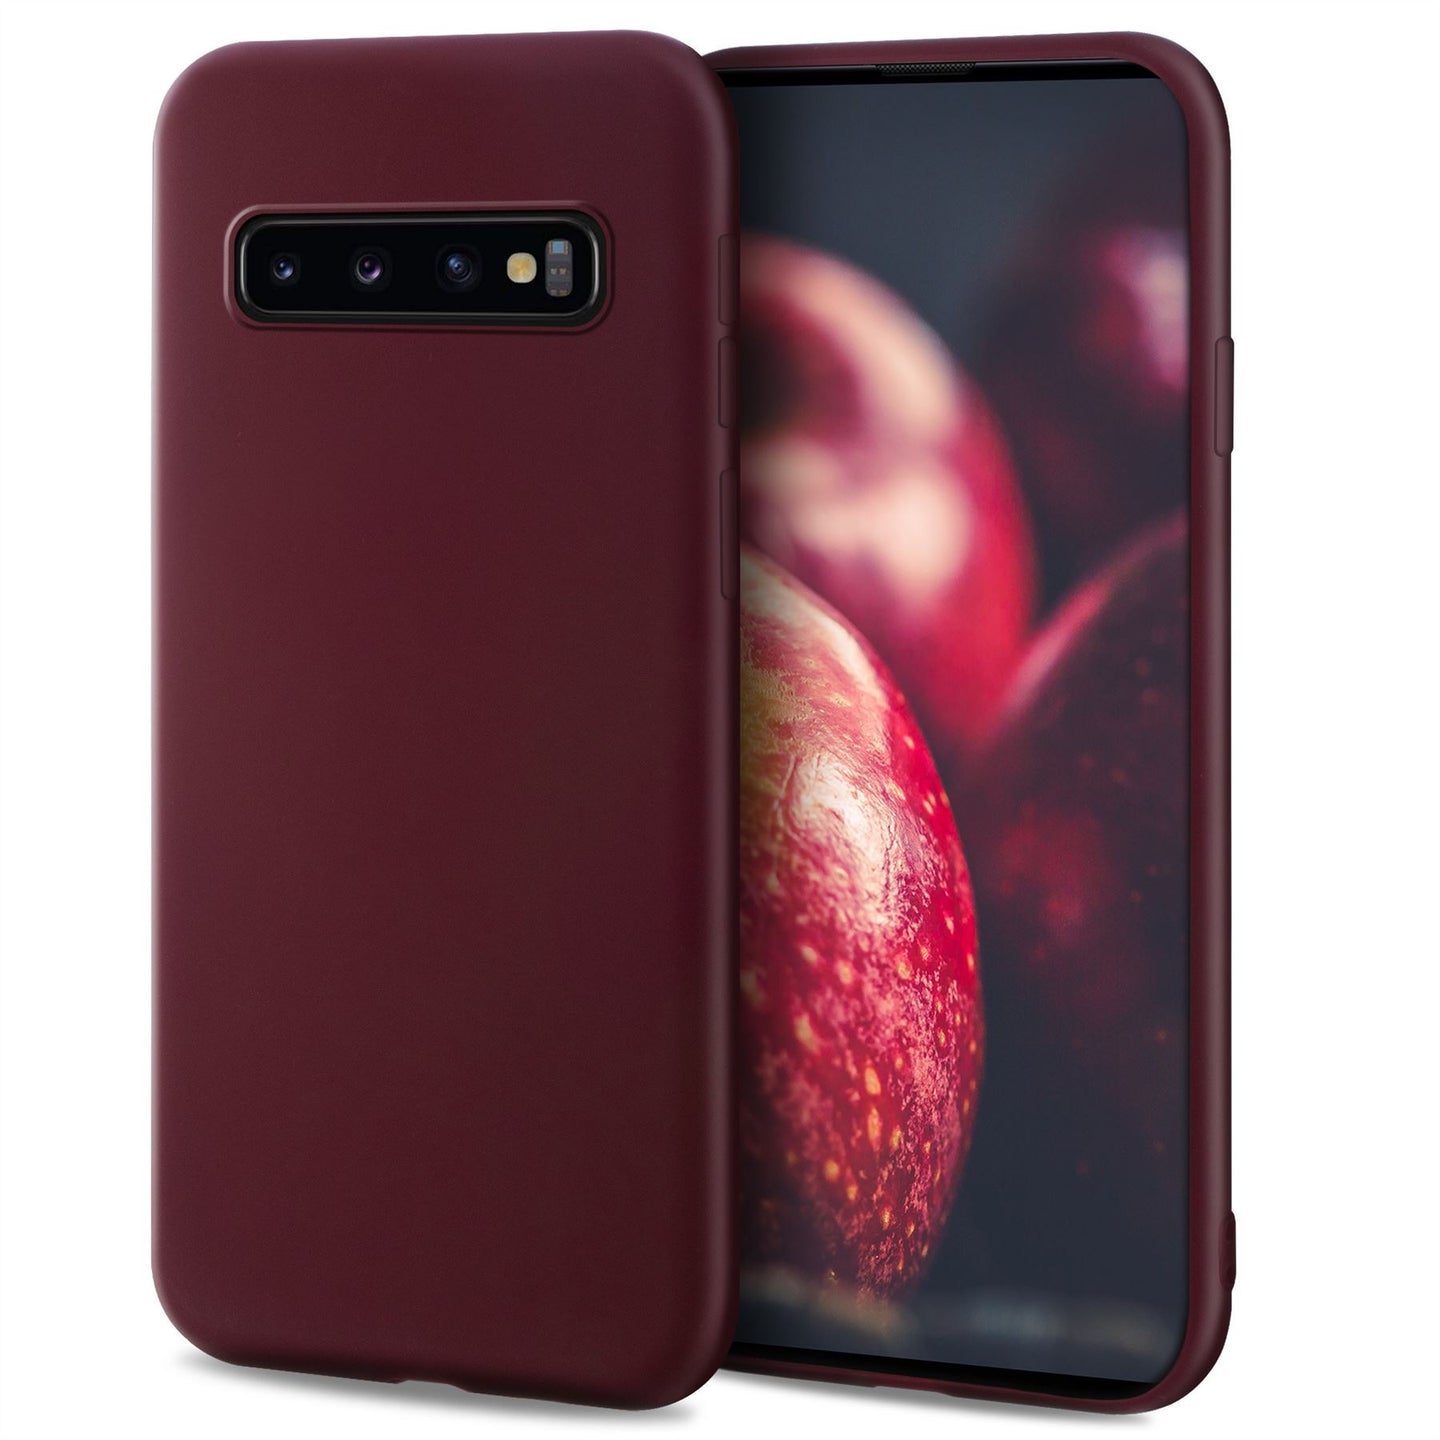 Moozy Minimalist Series Silicone Case for Samsung S10, Wine Red - Matte Finish Slim Soft TPU Cover